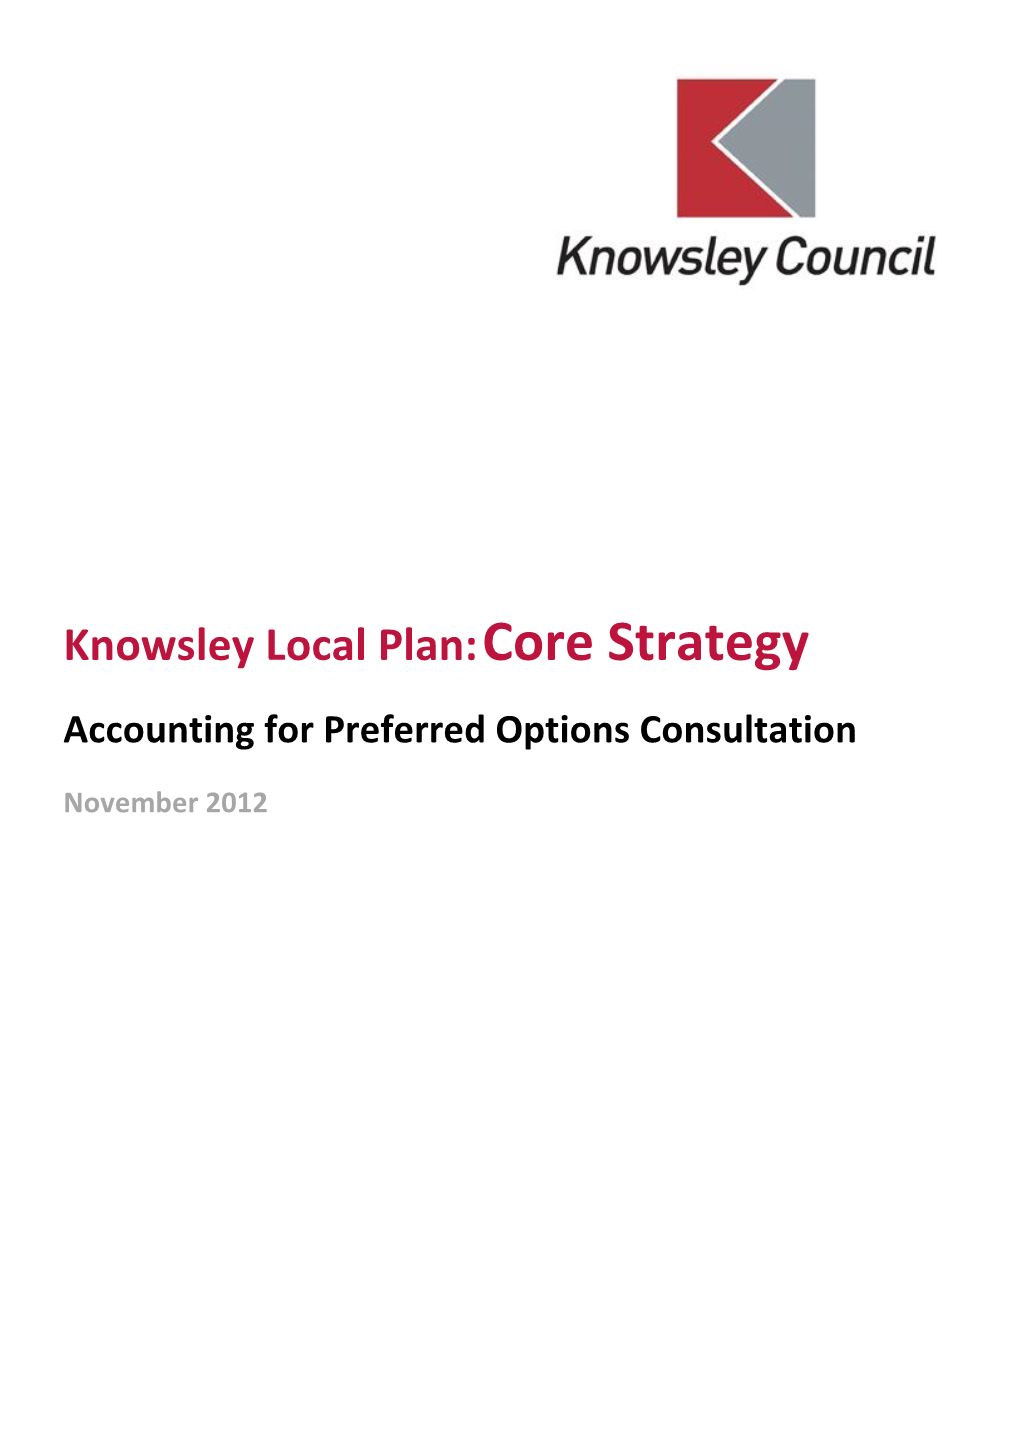 Accounting for Preferred Options Consultation